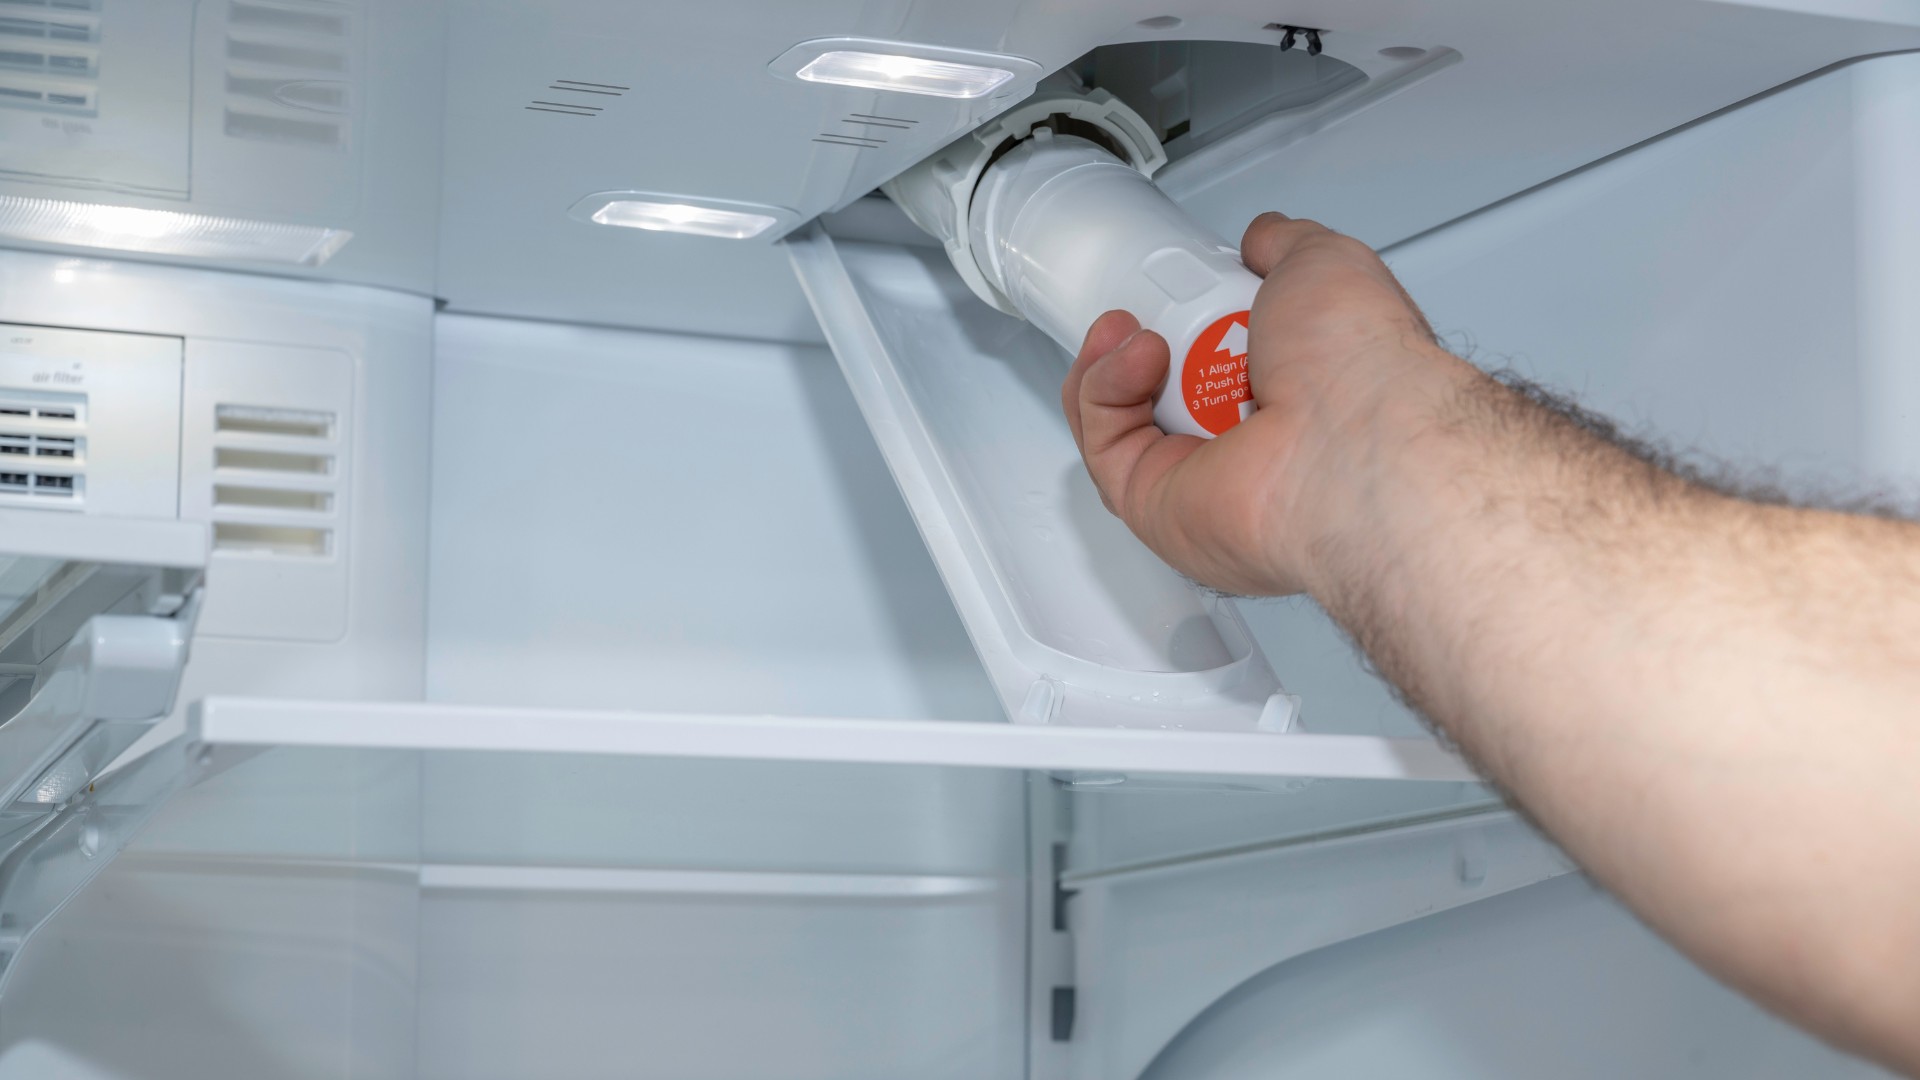 How To Change Water Filter On Frigidaire Refrigerator